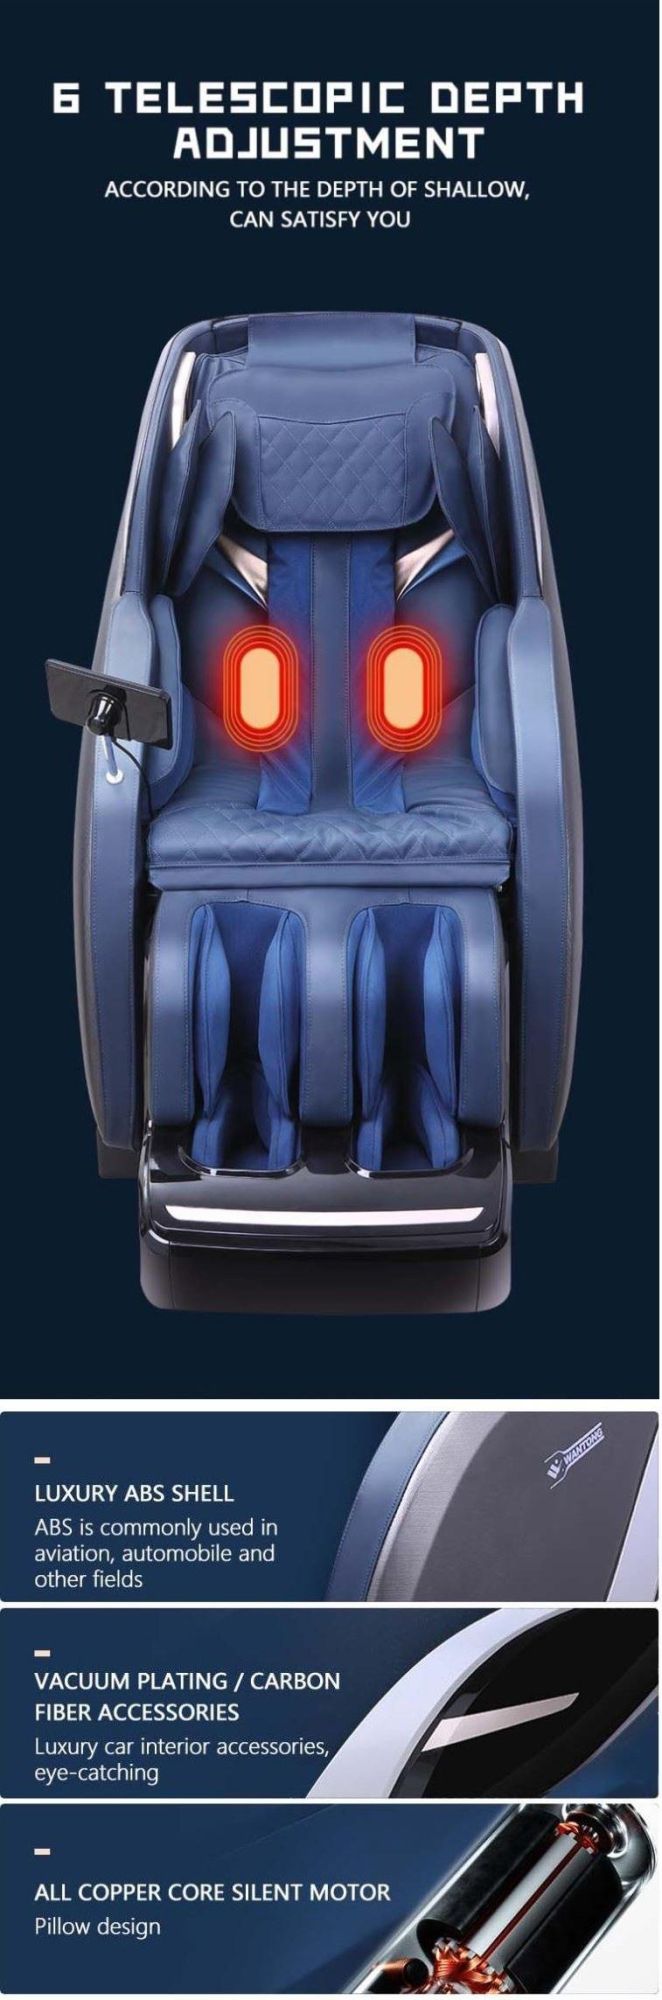 2021 Best Seller Massager 3D Electric Full Body Massage Chair with Neck Massage